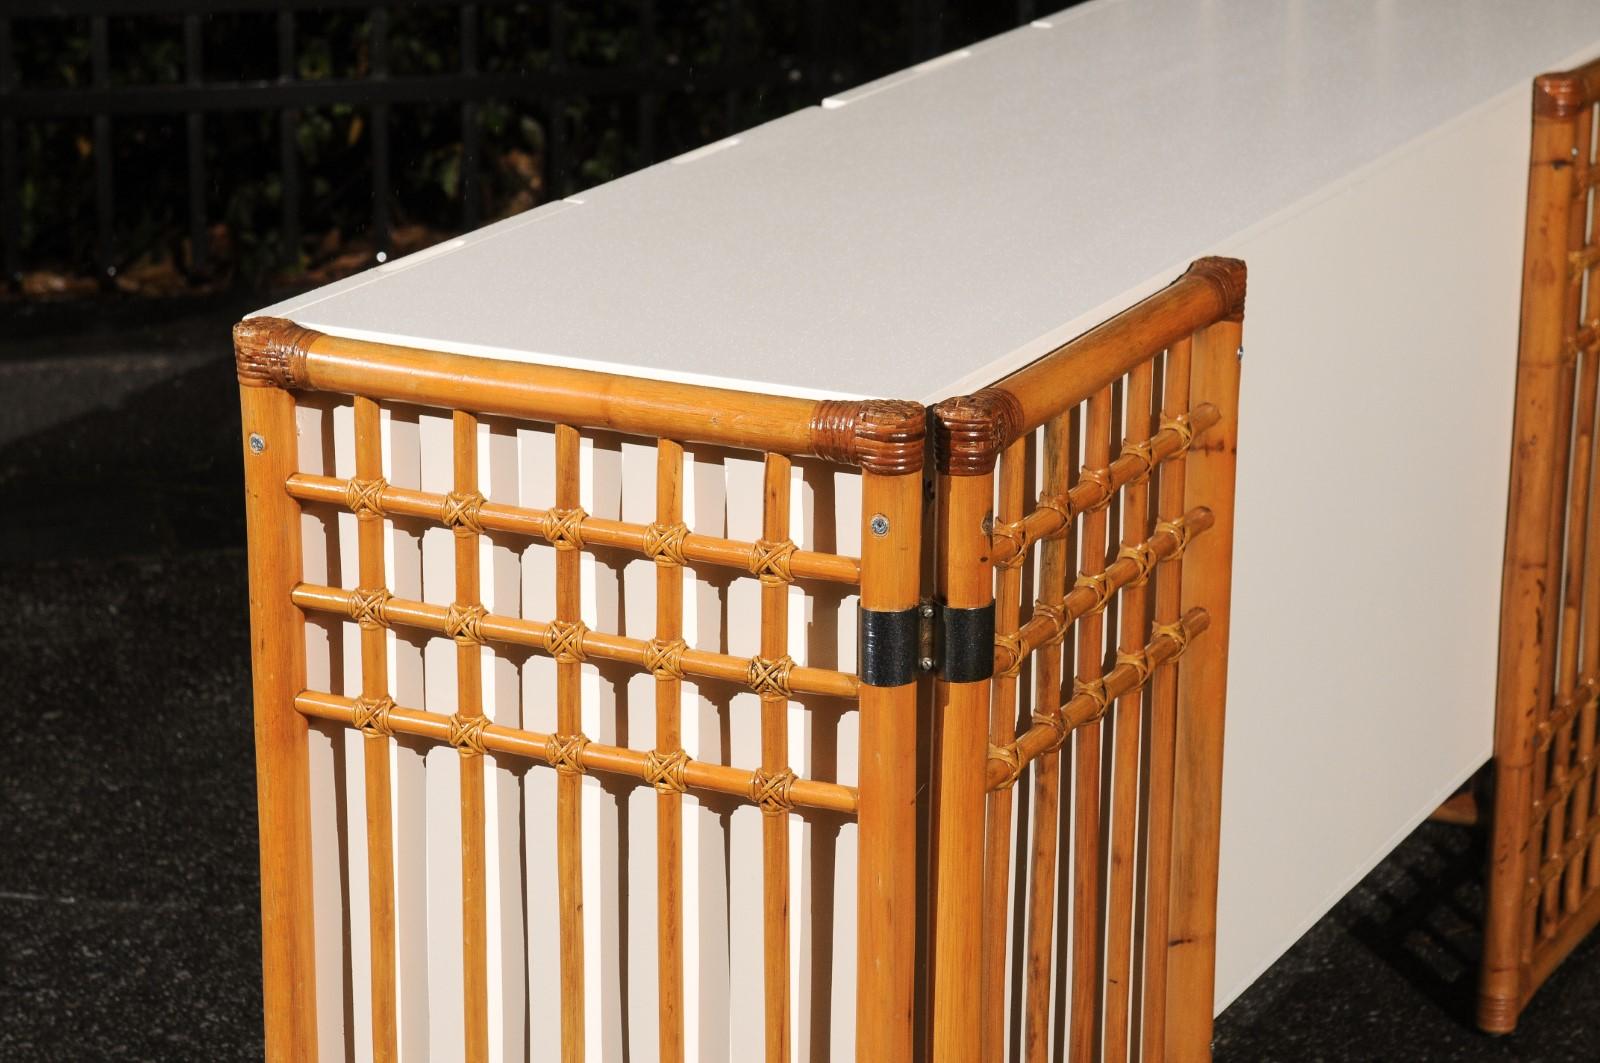 Sleek Restored Cream Lacquer Cabinet with Rattan and Cane Accents, circa 1975 For Sale 3